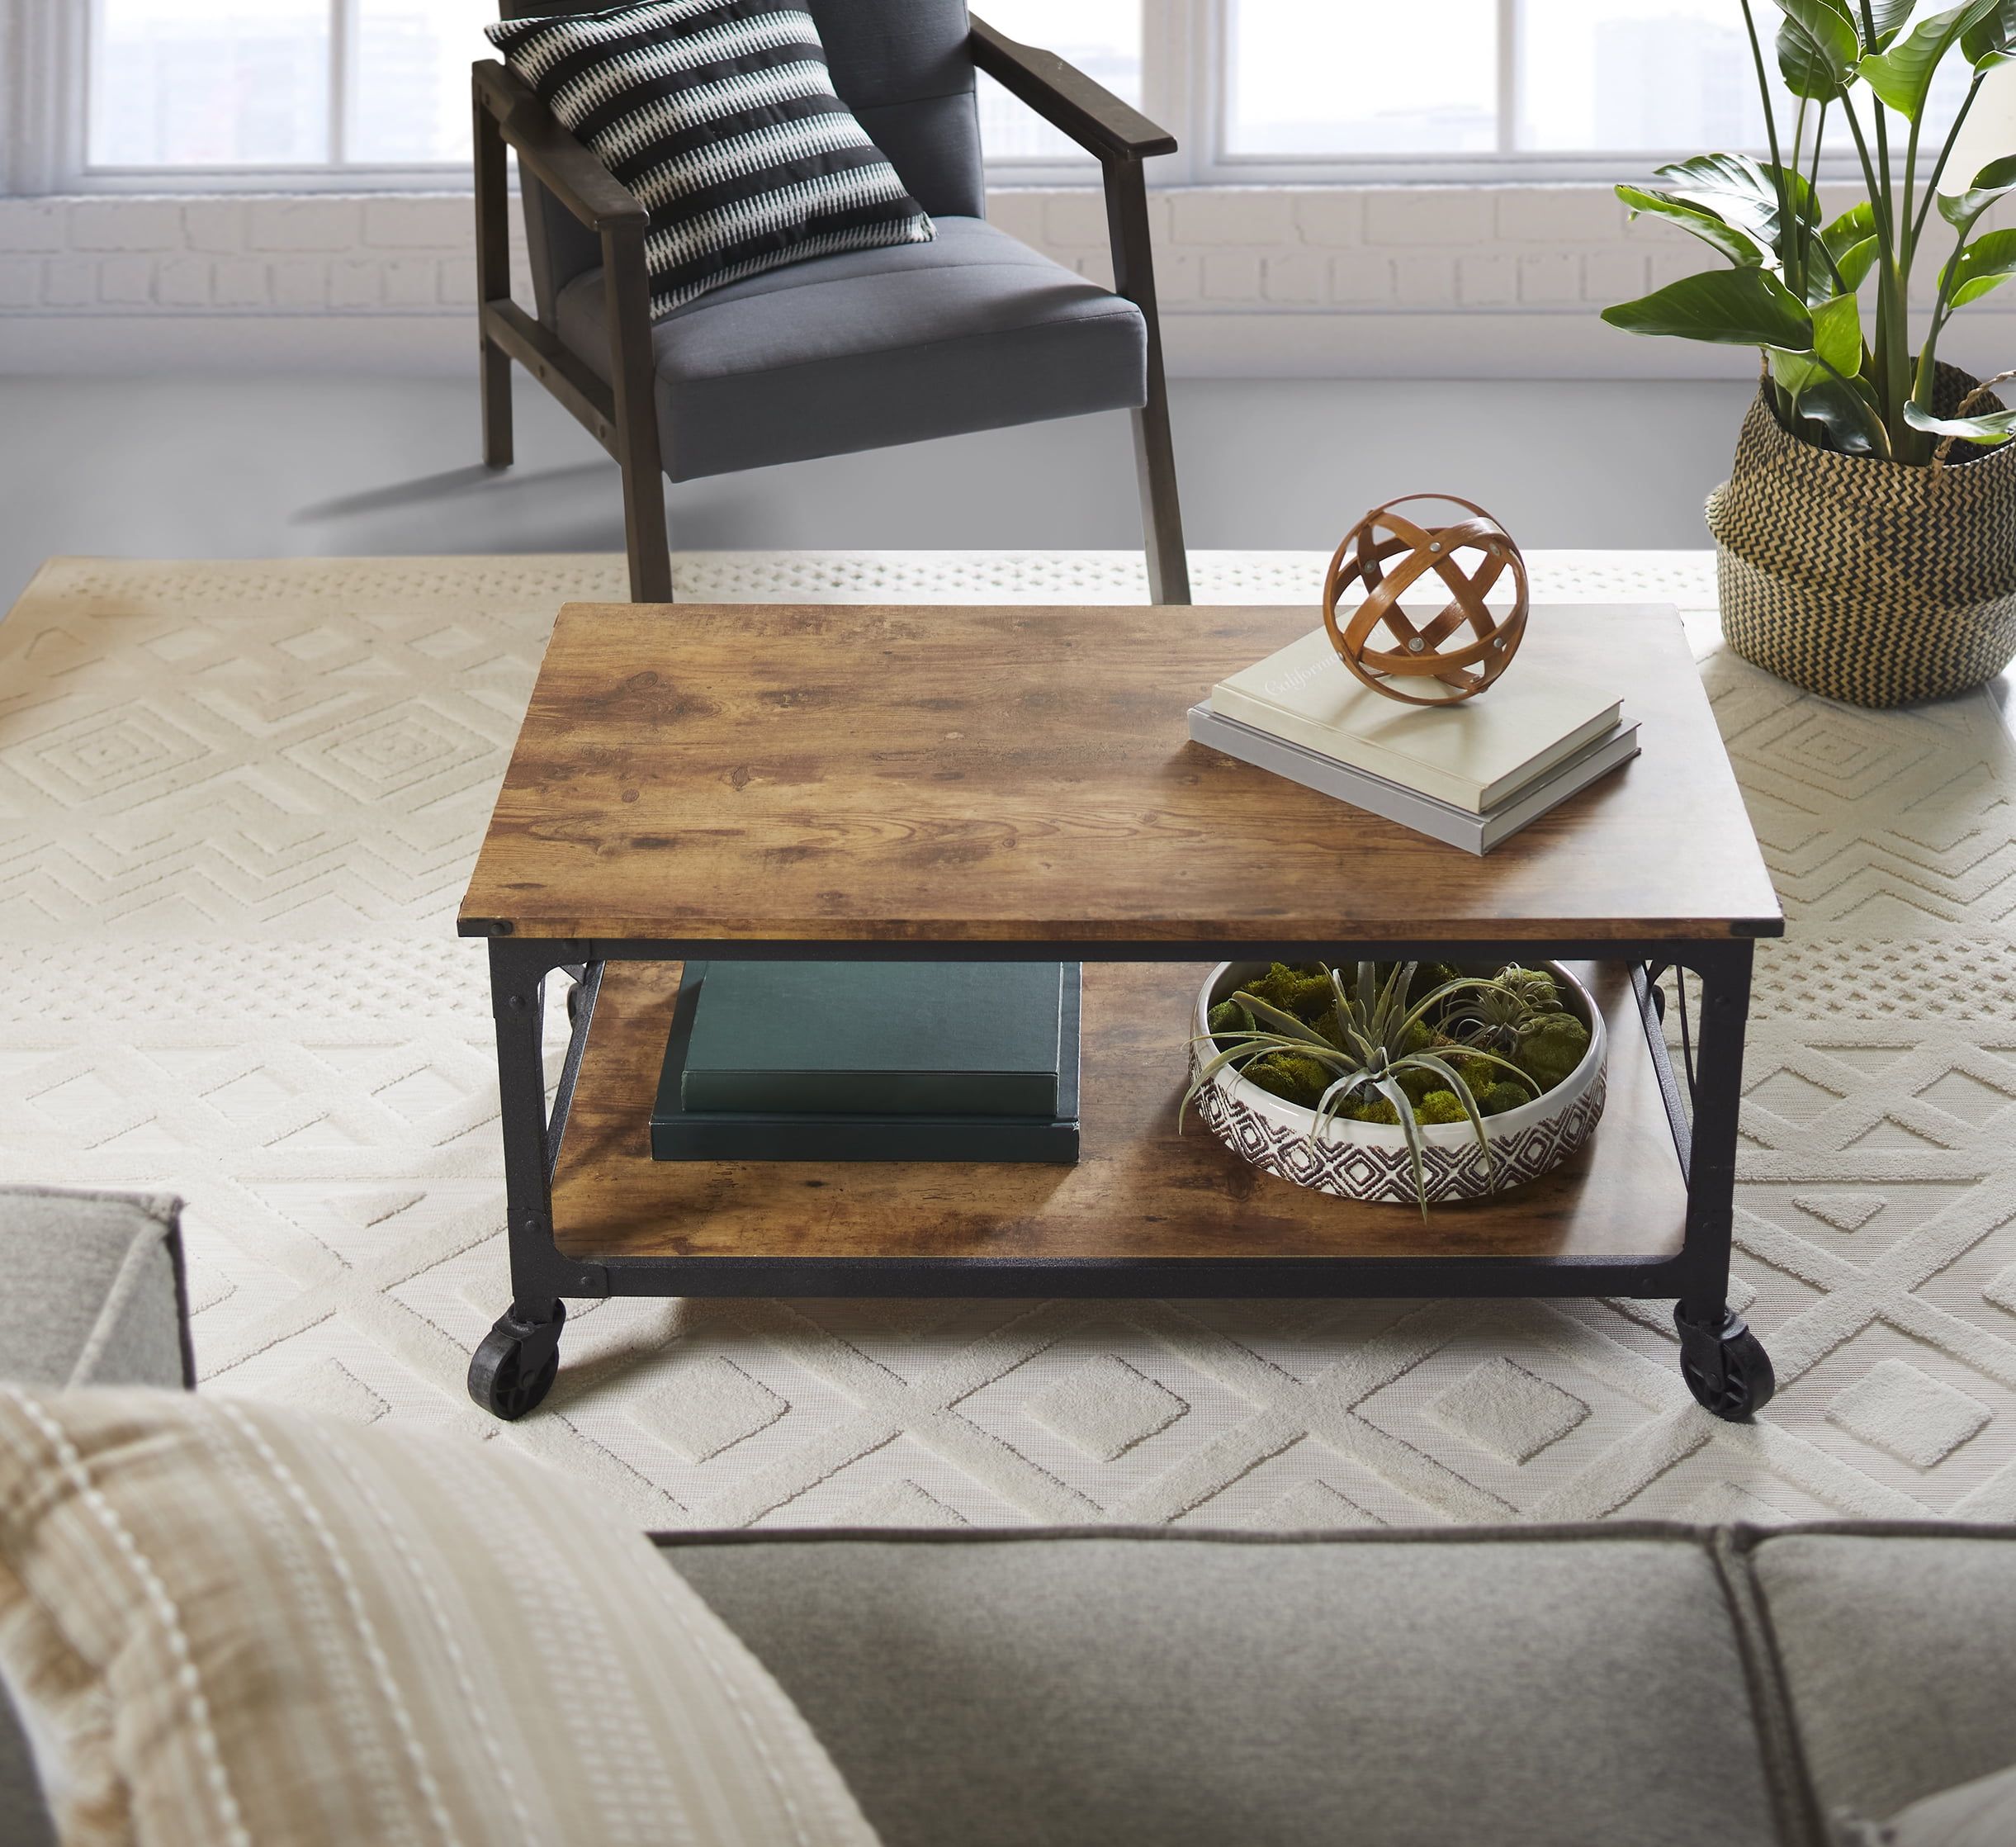 Rustic Country Coffee Table, Weathered Pine Finish – Walmart Intended For Brown Rustic Coffee Tables (Gallery 16 of 20)